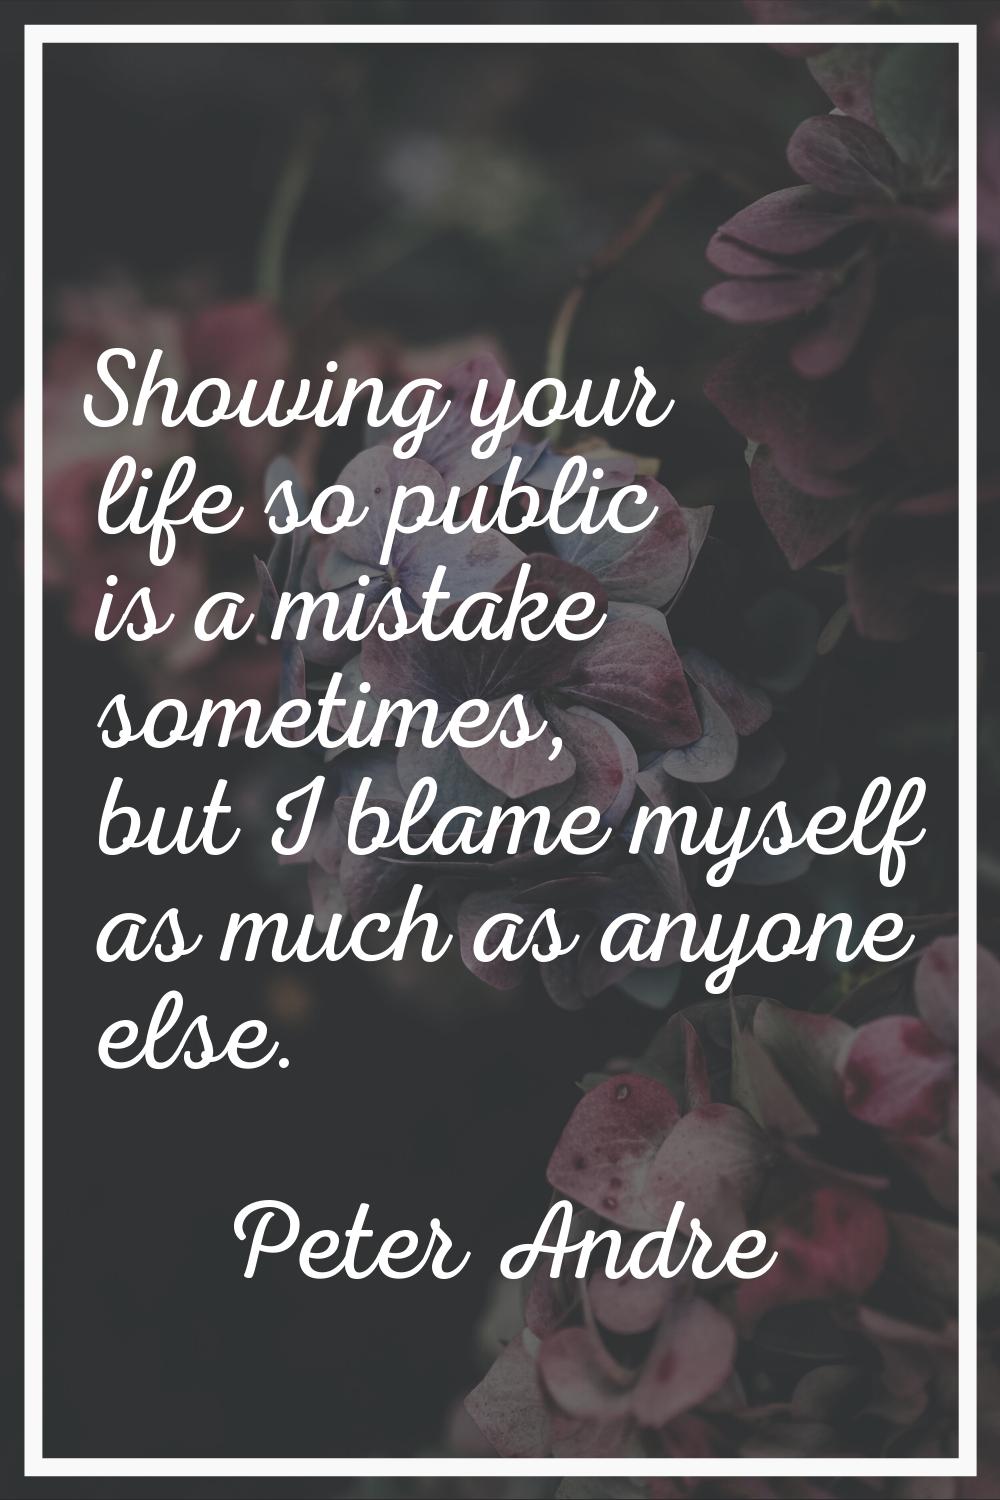 Showing your life so public is a mistake sometimes, but I blame myself as much as anyone else.